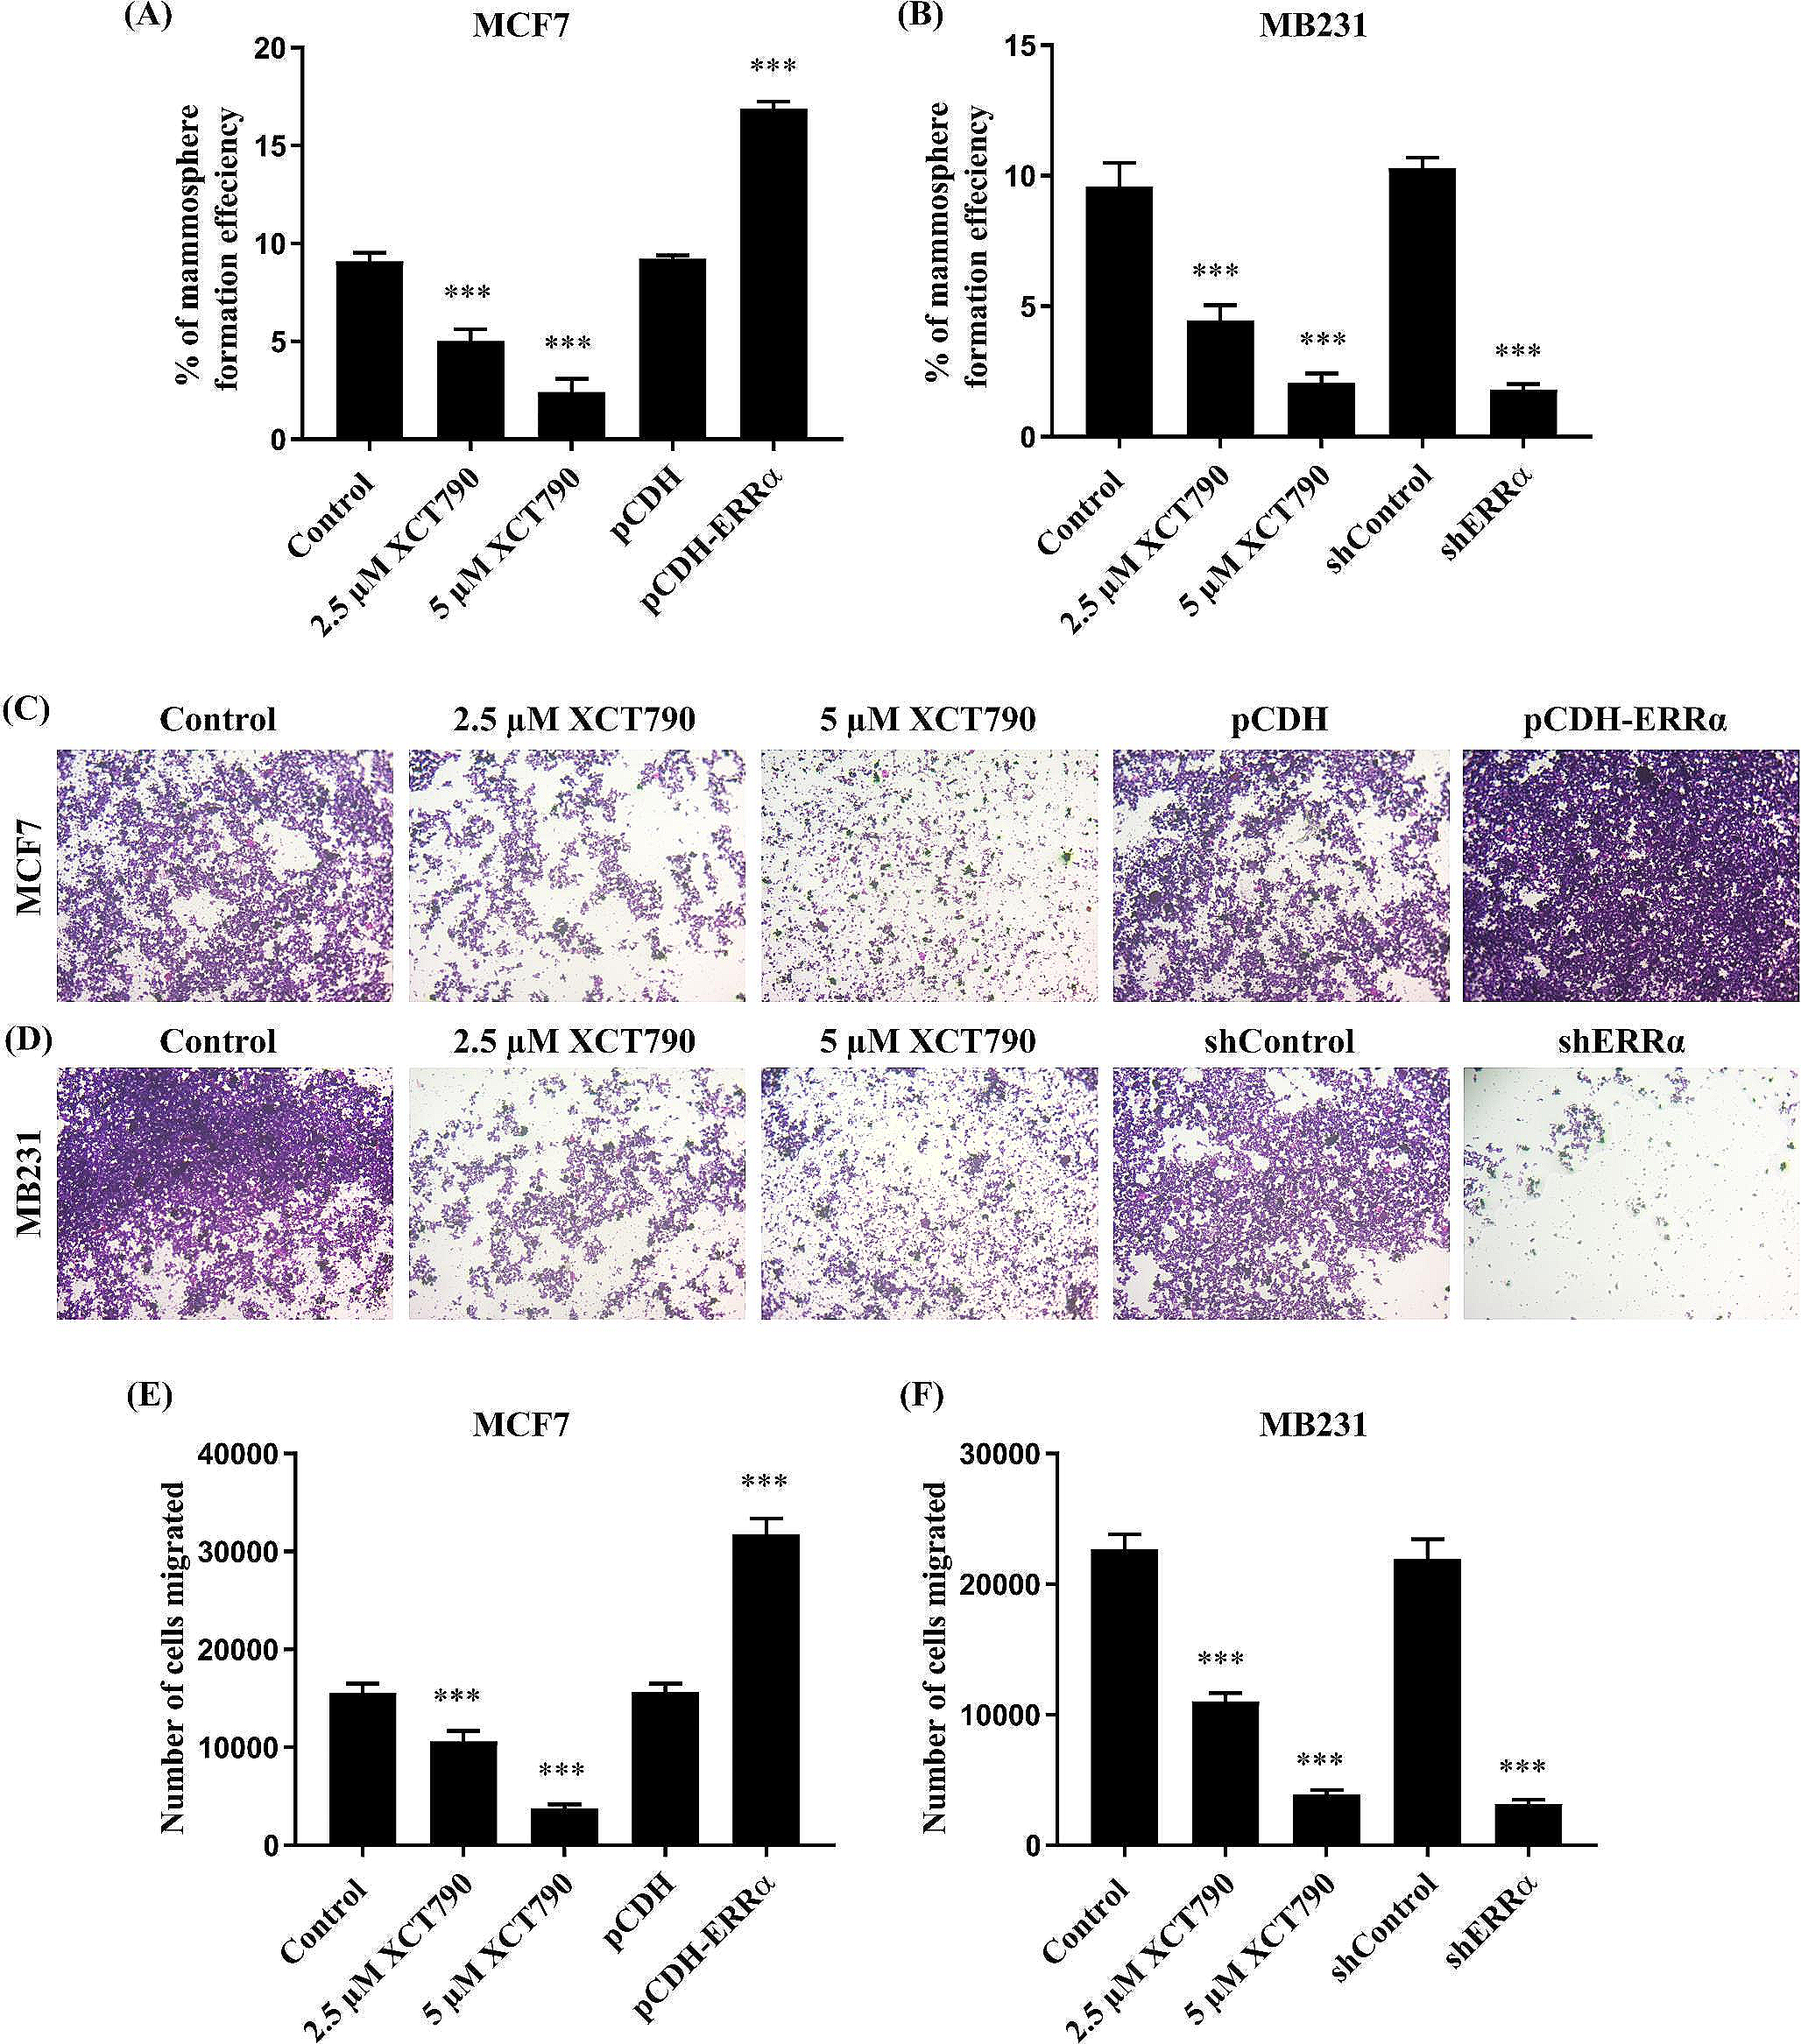 Estrogen-related receptor alpha (ERRα) promotes the migration, invasion and angiogenesis of breast cancer stem cell-like cells